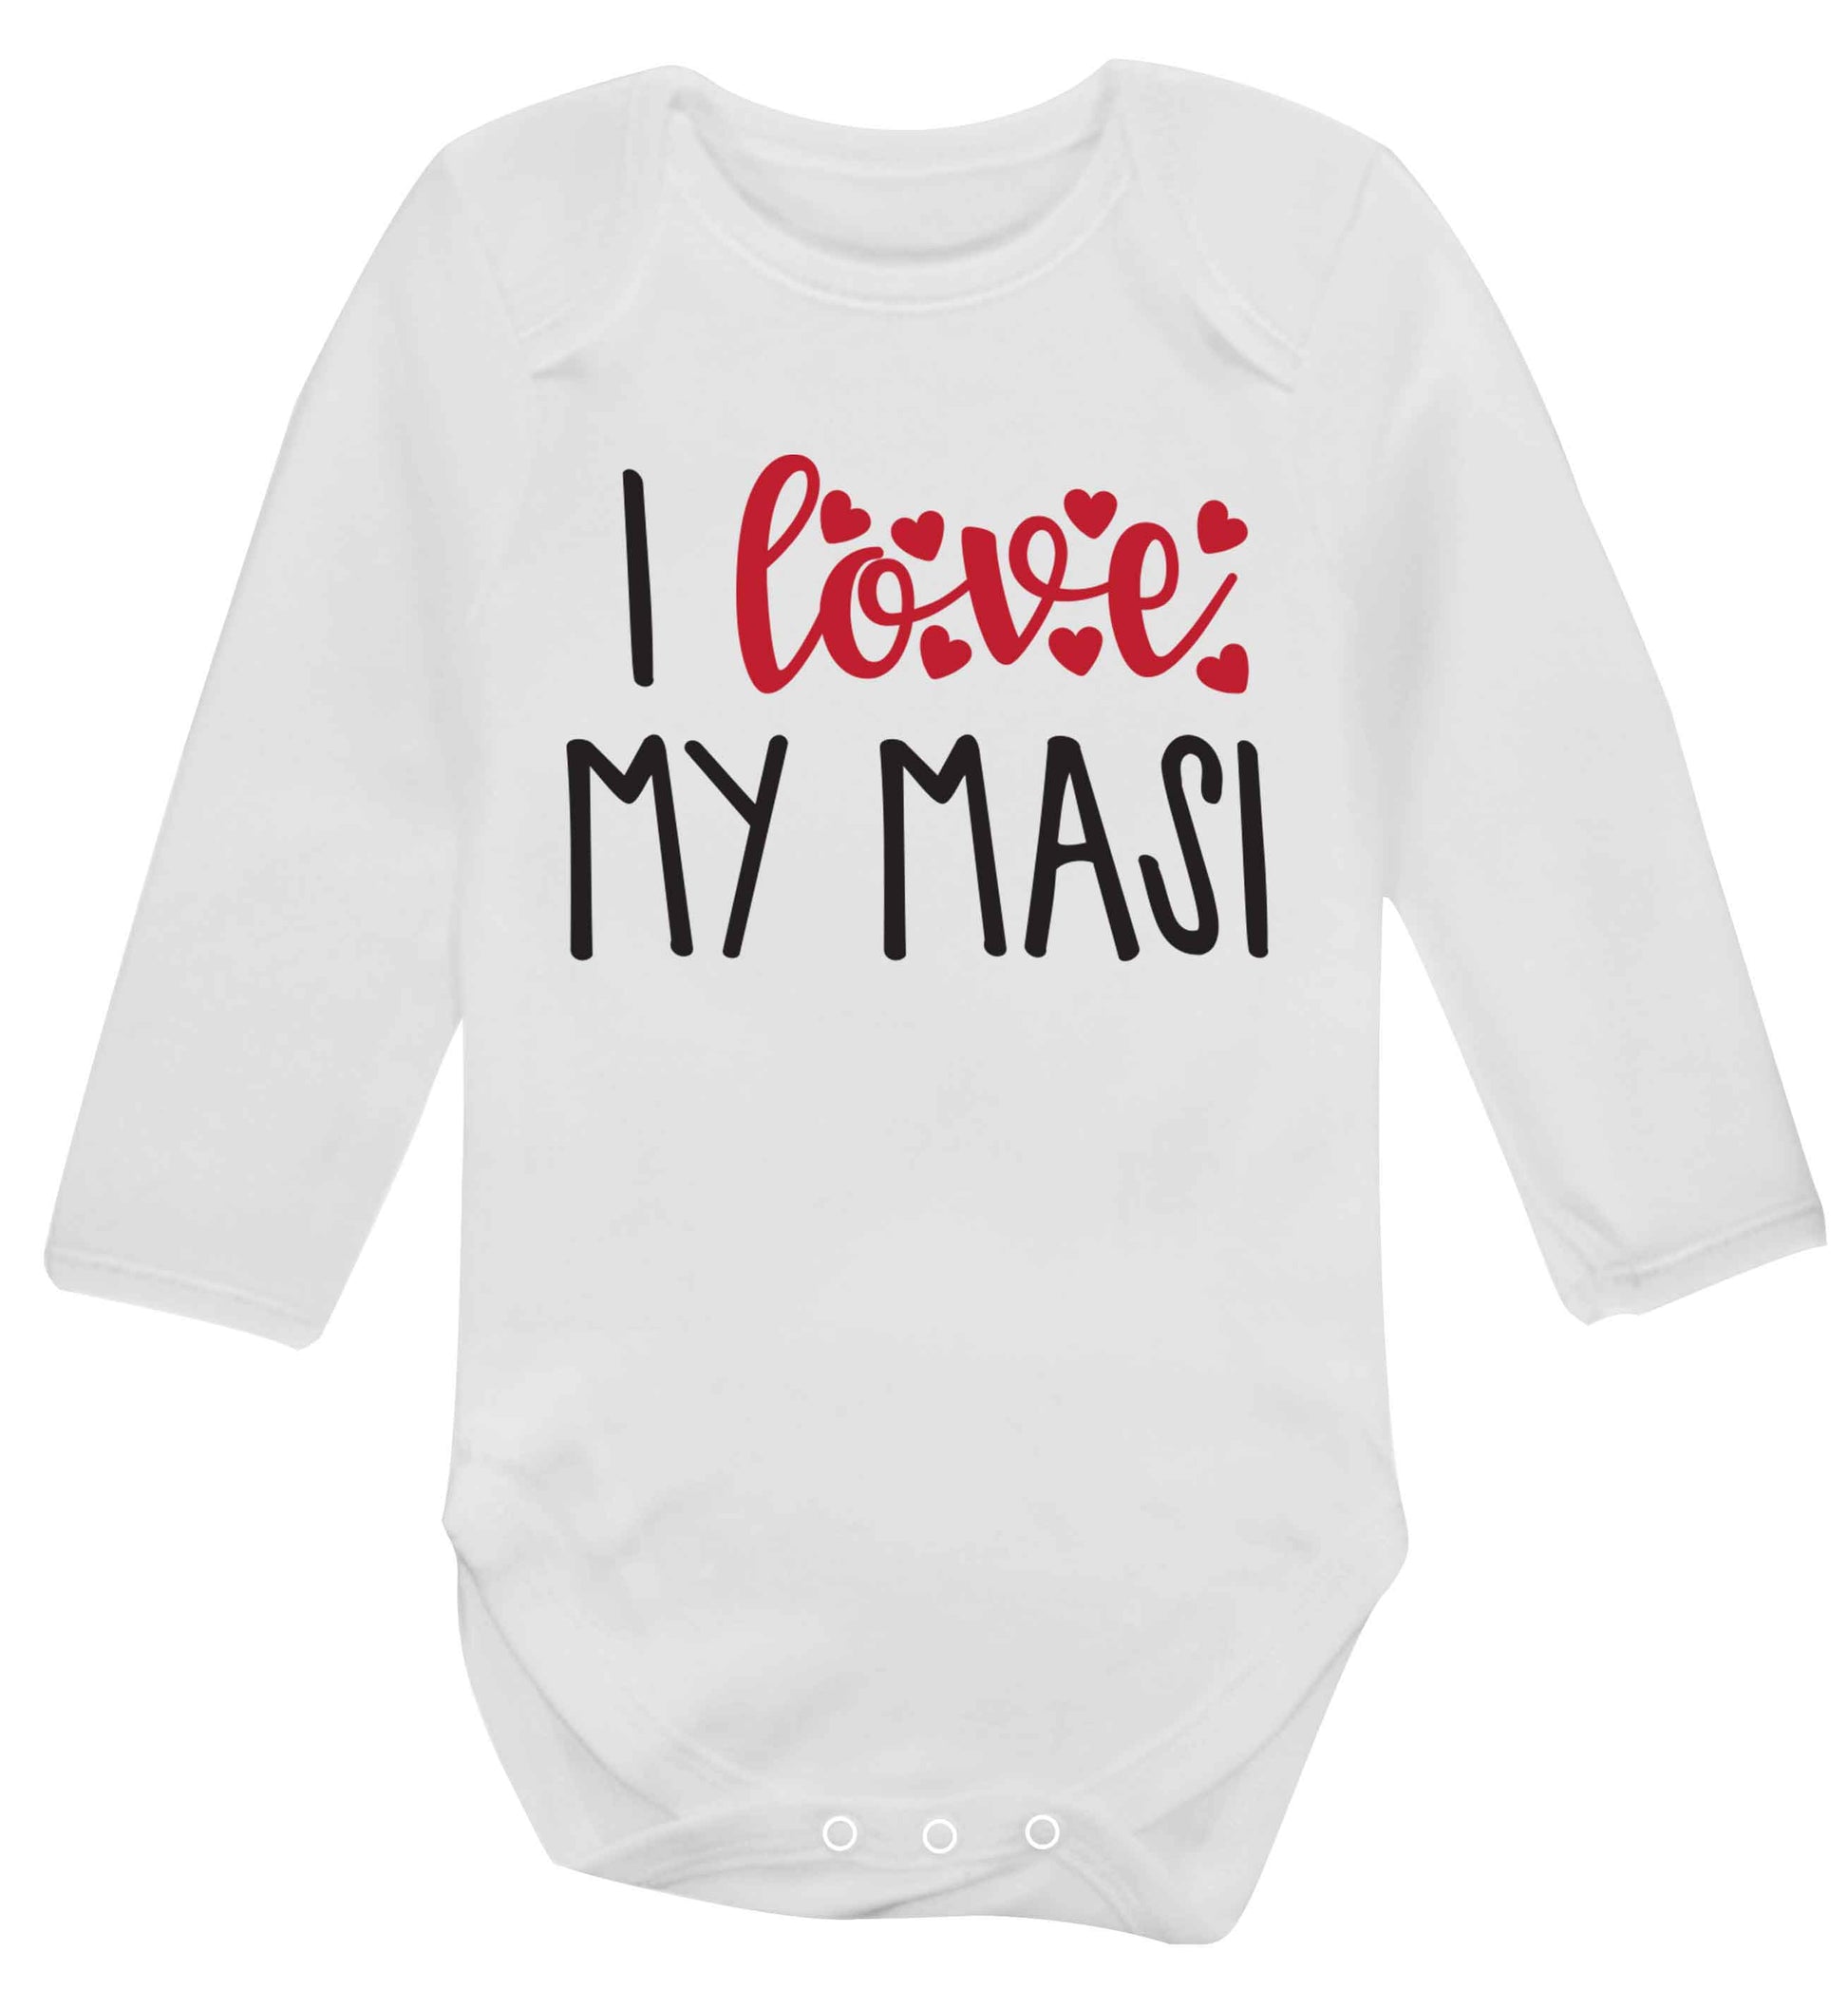 I love my masi Baby Vest long sleeved white 6-12 months